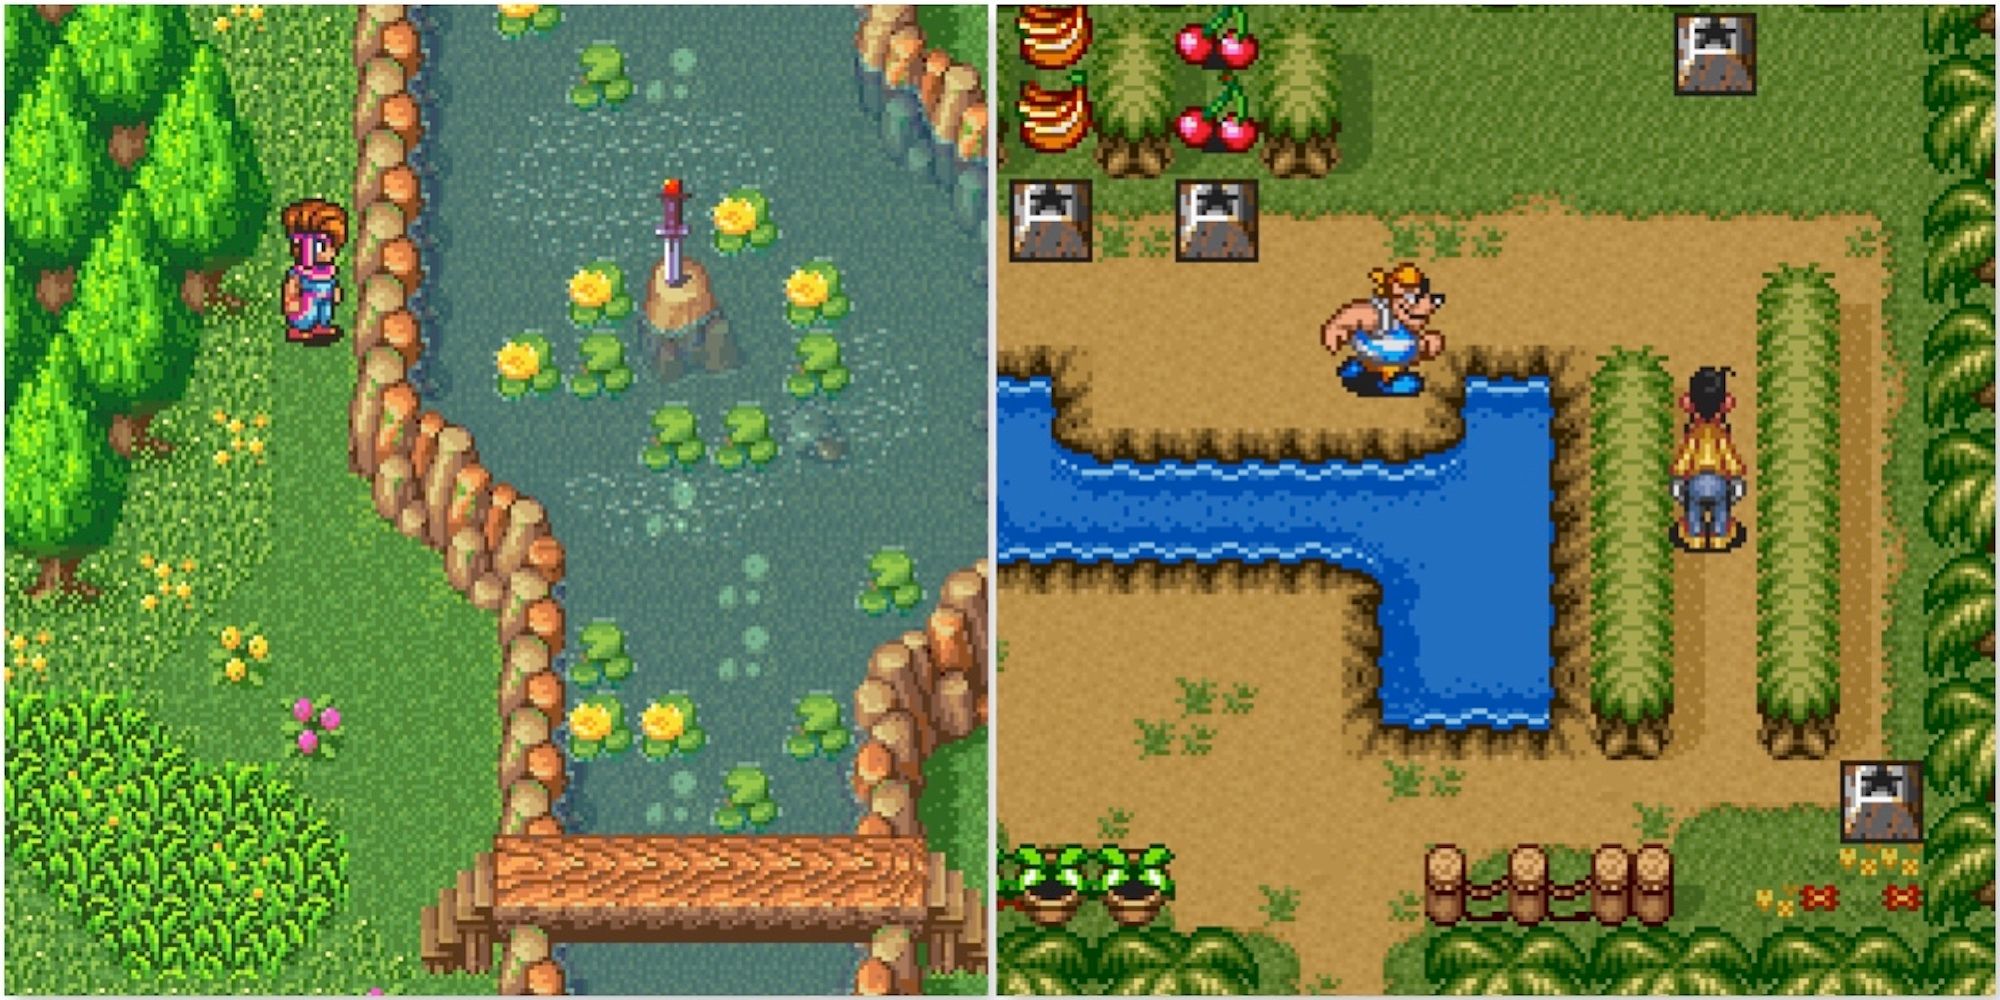 Exploring the world in Secret Of Mana and Goof Troop